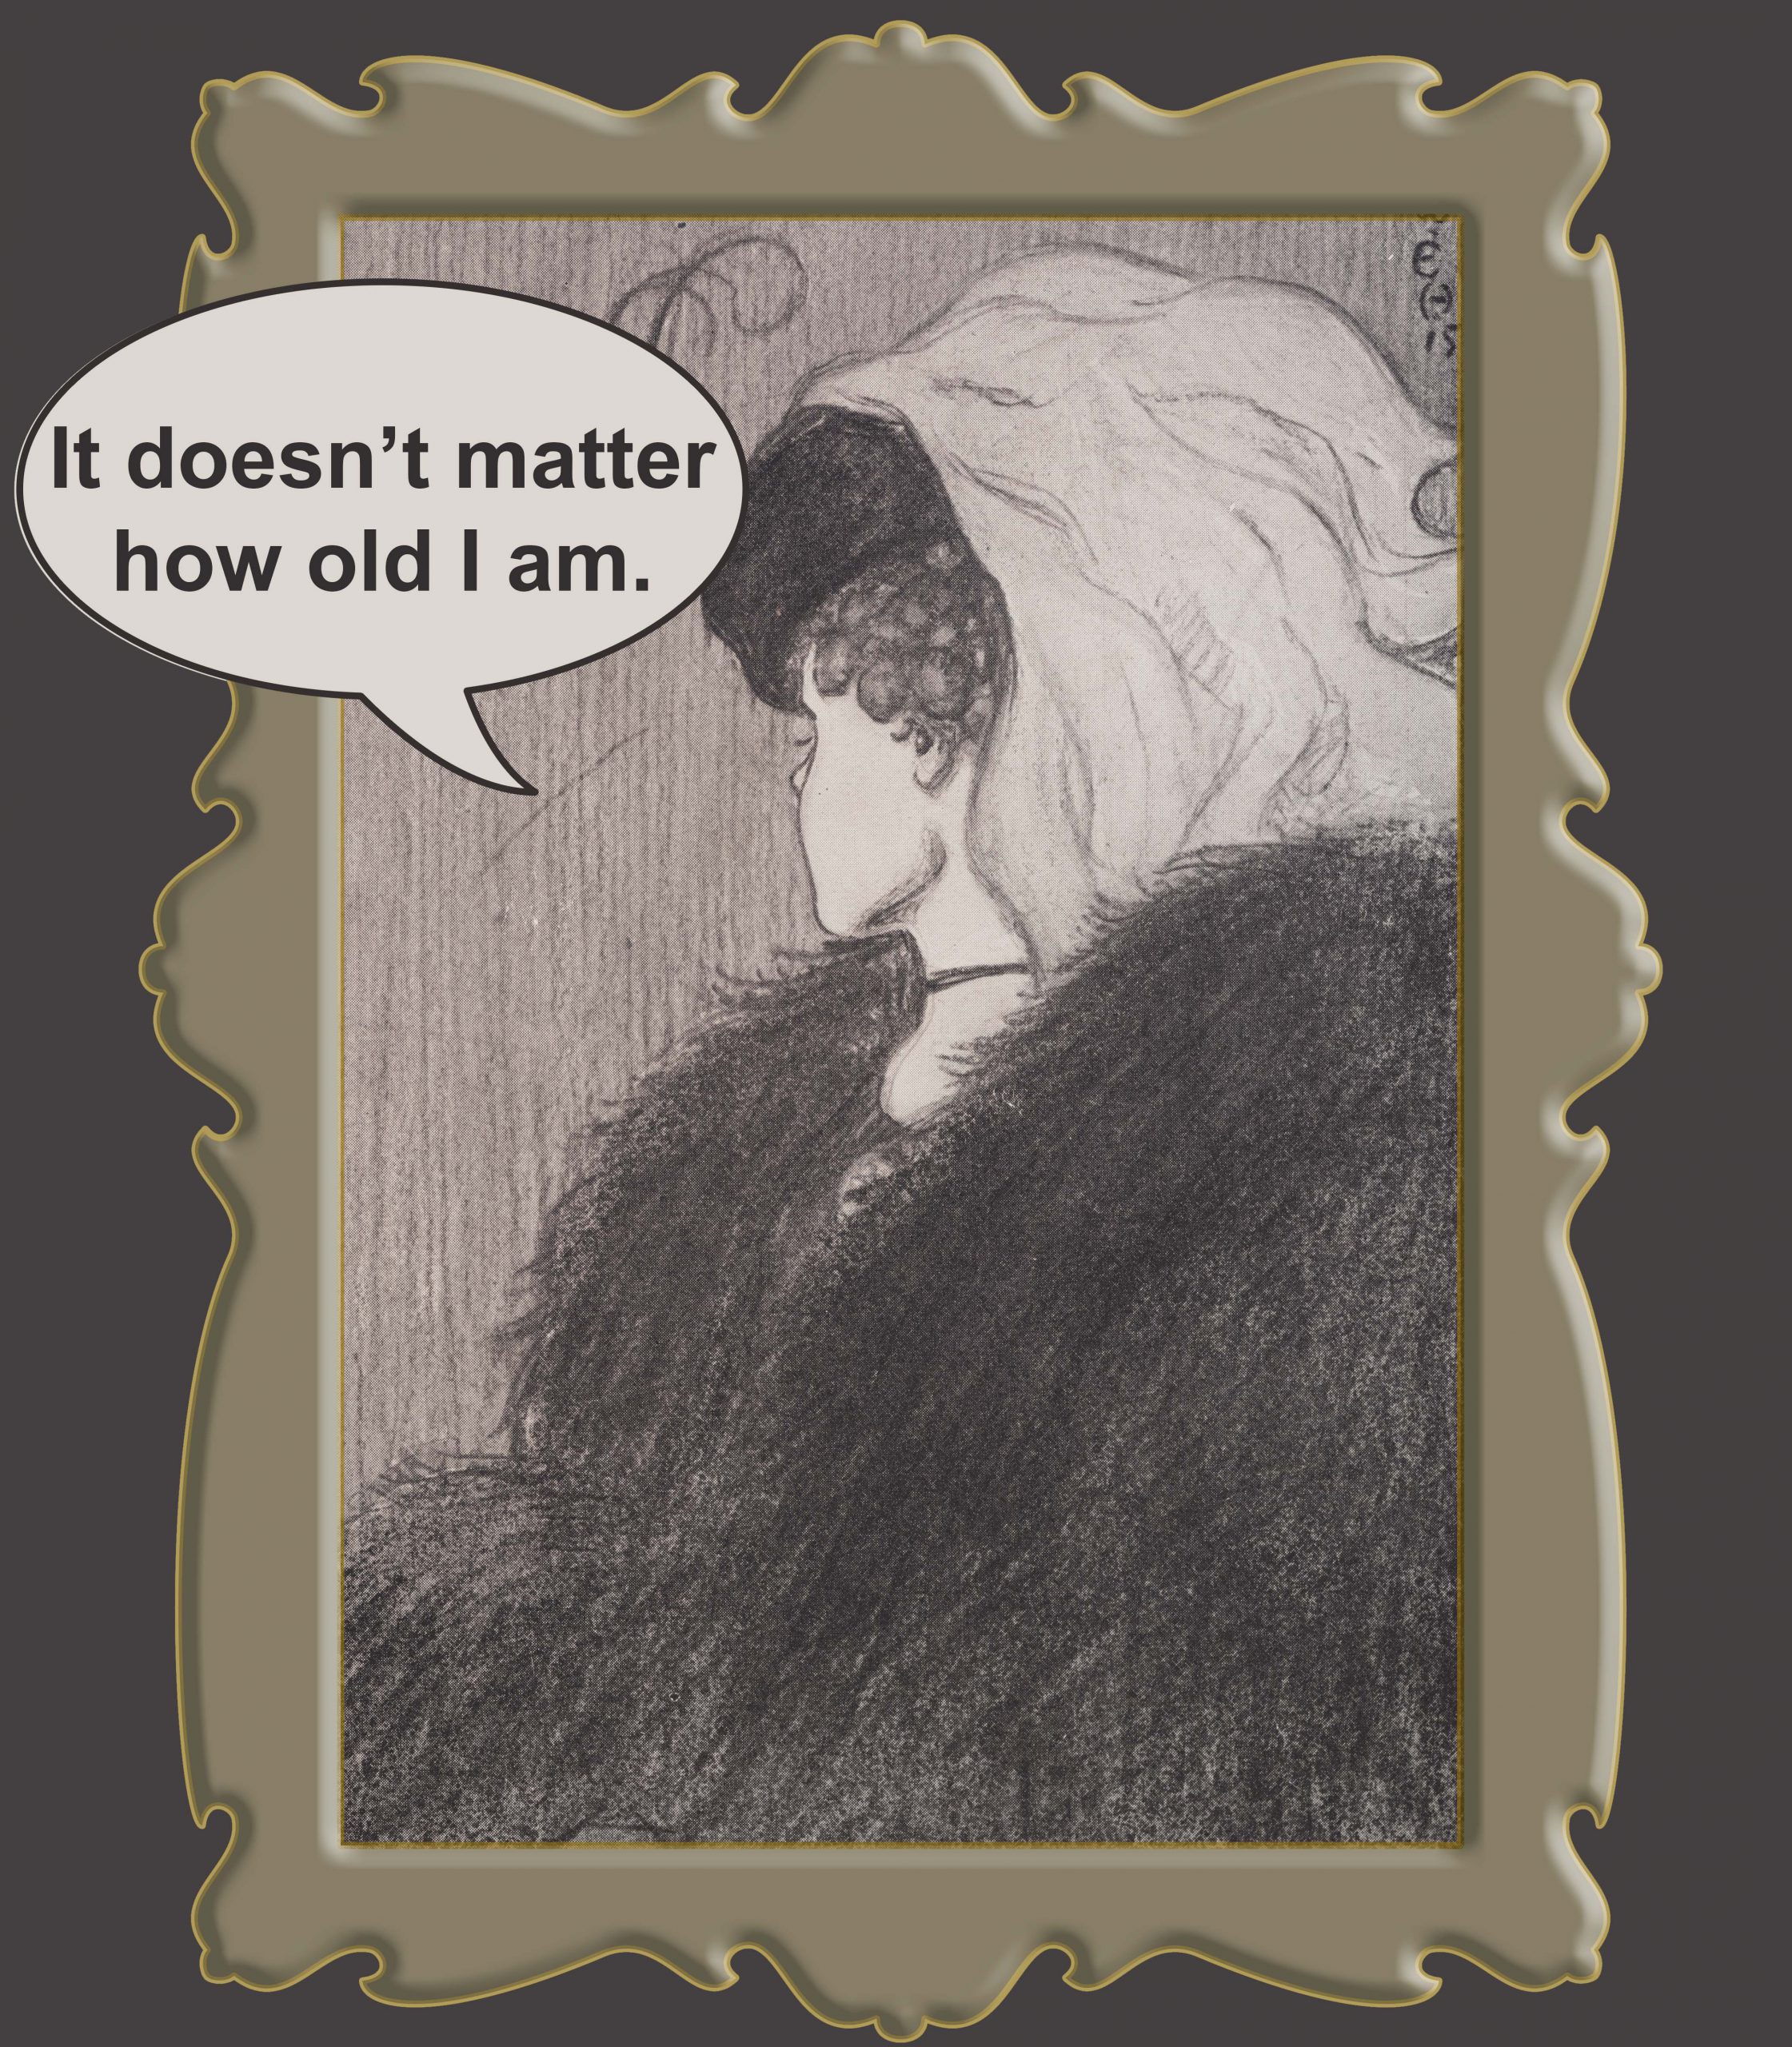 A pencil drawing of an optical illusion sits in an ornate-looking frame. The drawing is of a woman in a fur coat, and looks like a young woman in her 20s or an elderly lady depending on how you view it. In a speech bubble, the woman states, “It doesn’t matter how old I am.”